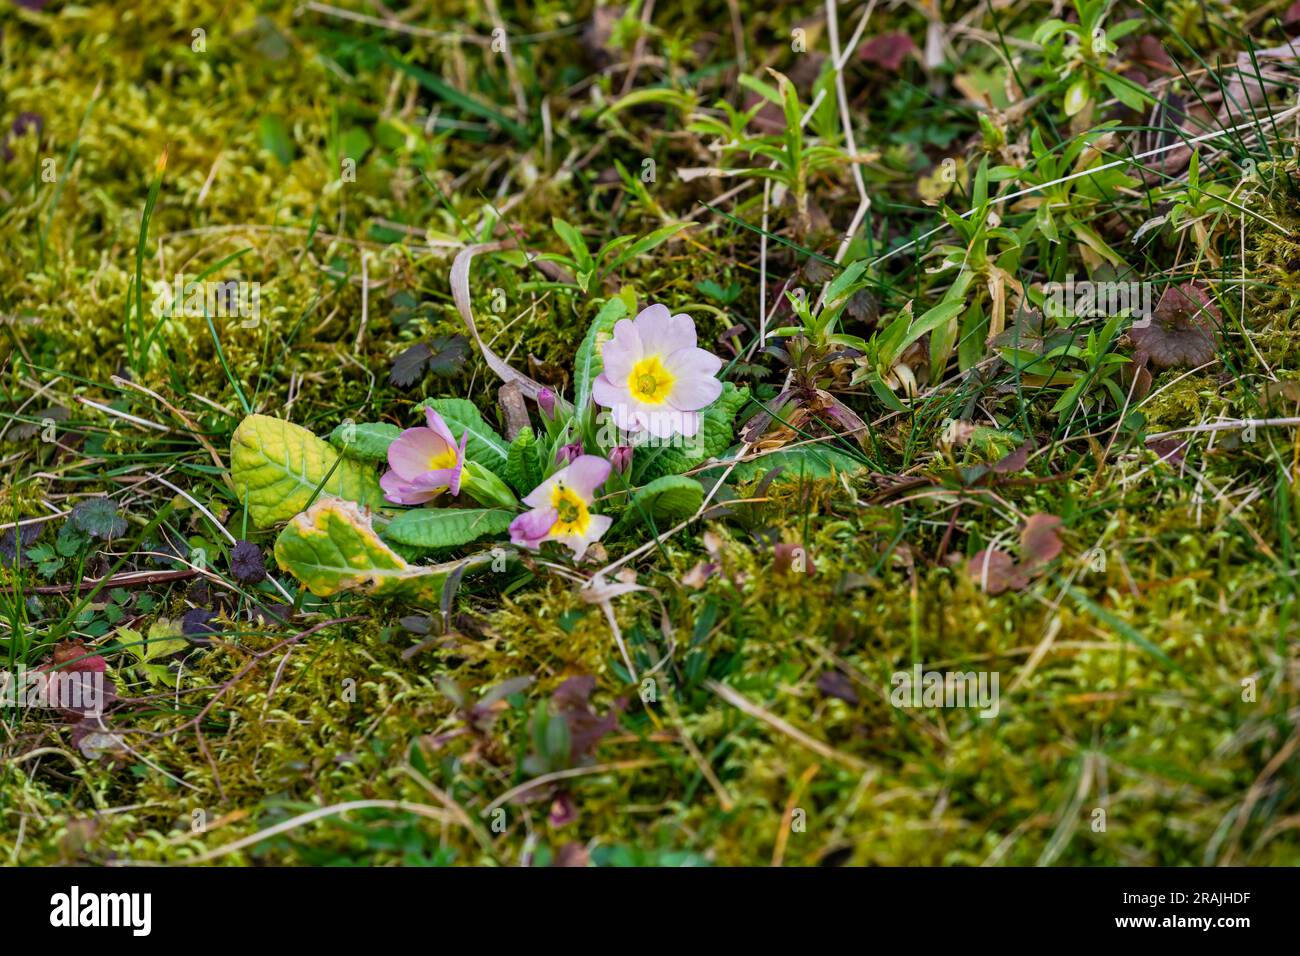 A white cowslip on an overgrown lawn heralds spring Stock Photo